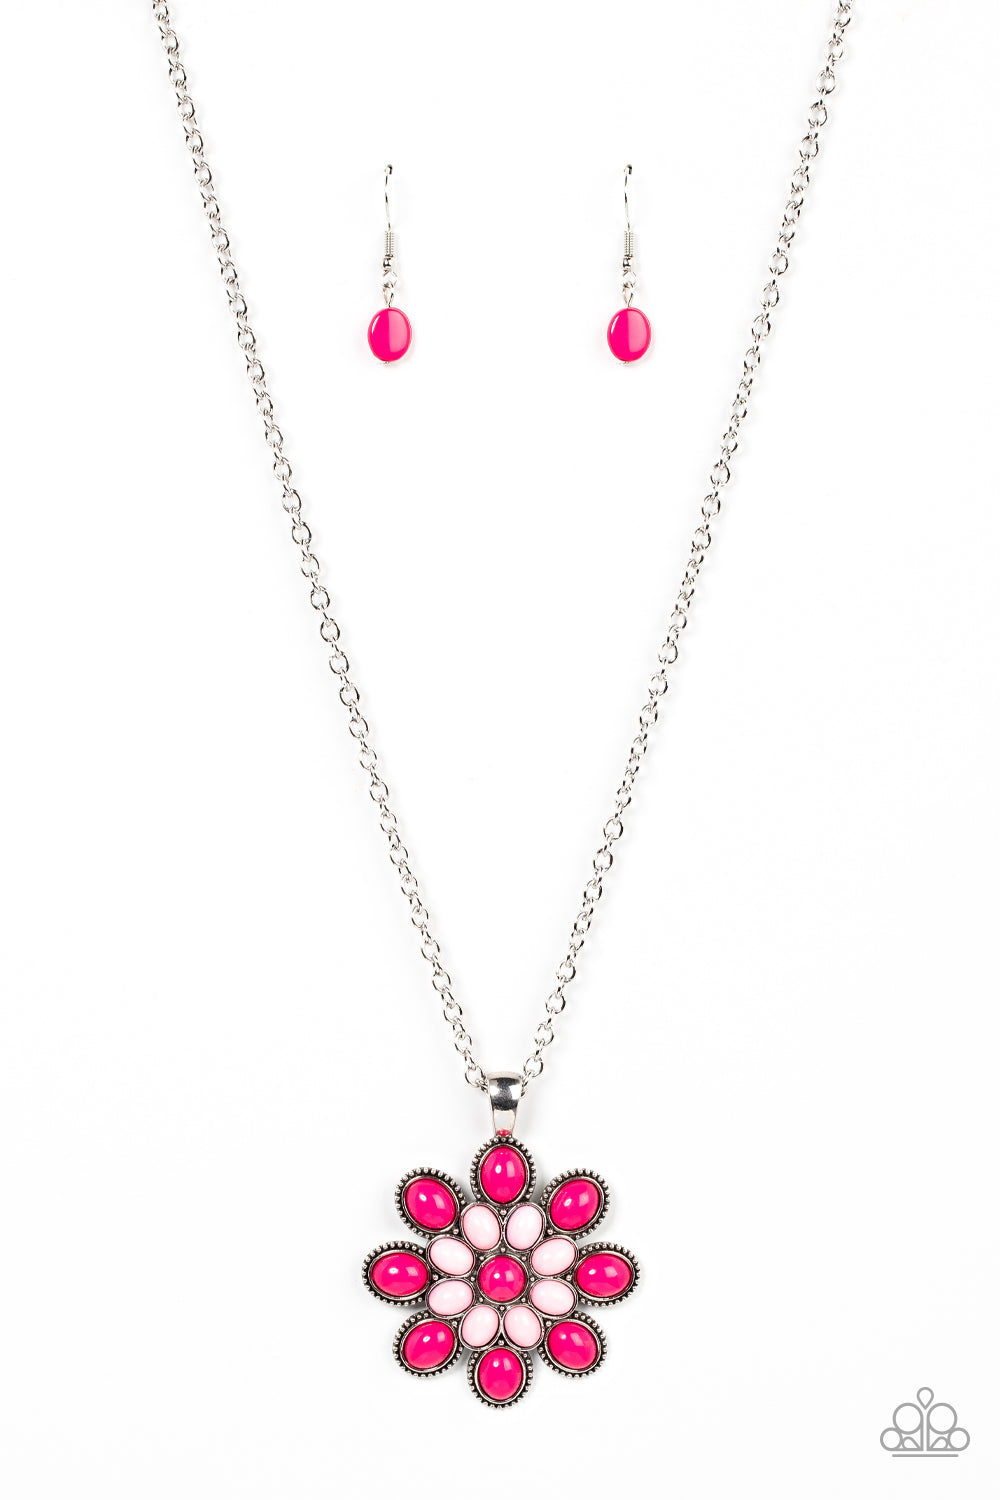 Paparazzi Necklace In the MEADOW of Nowhere - Pink